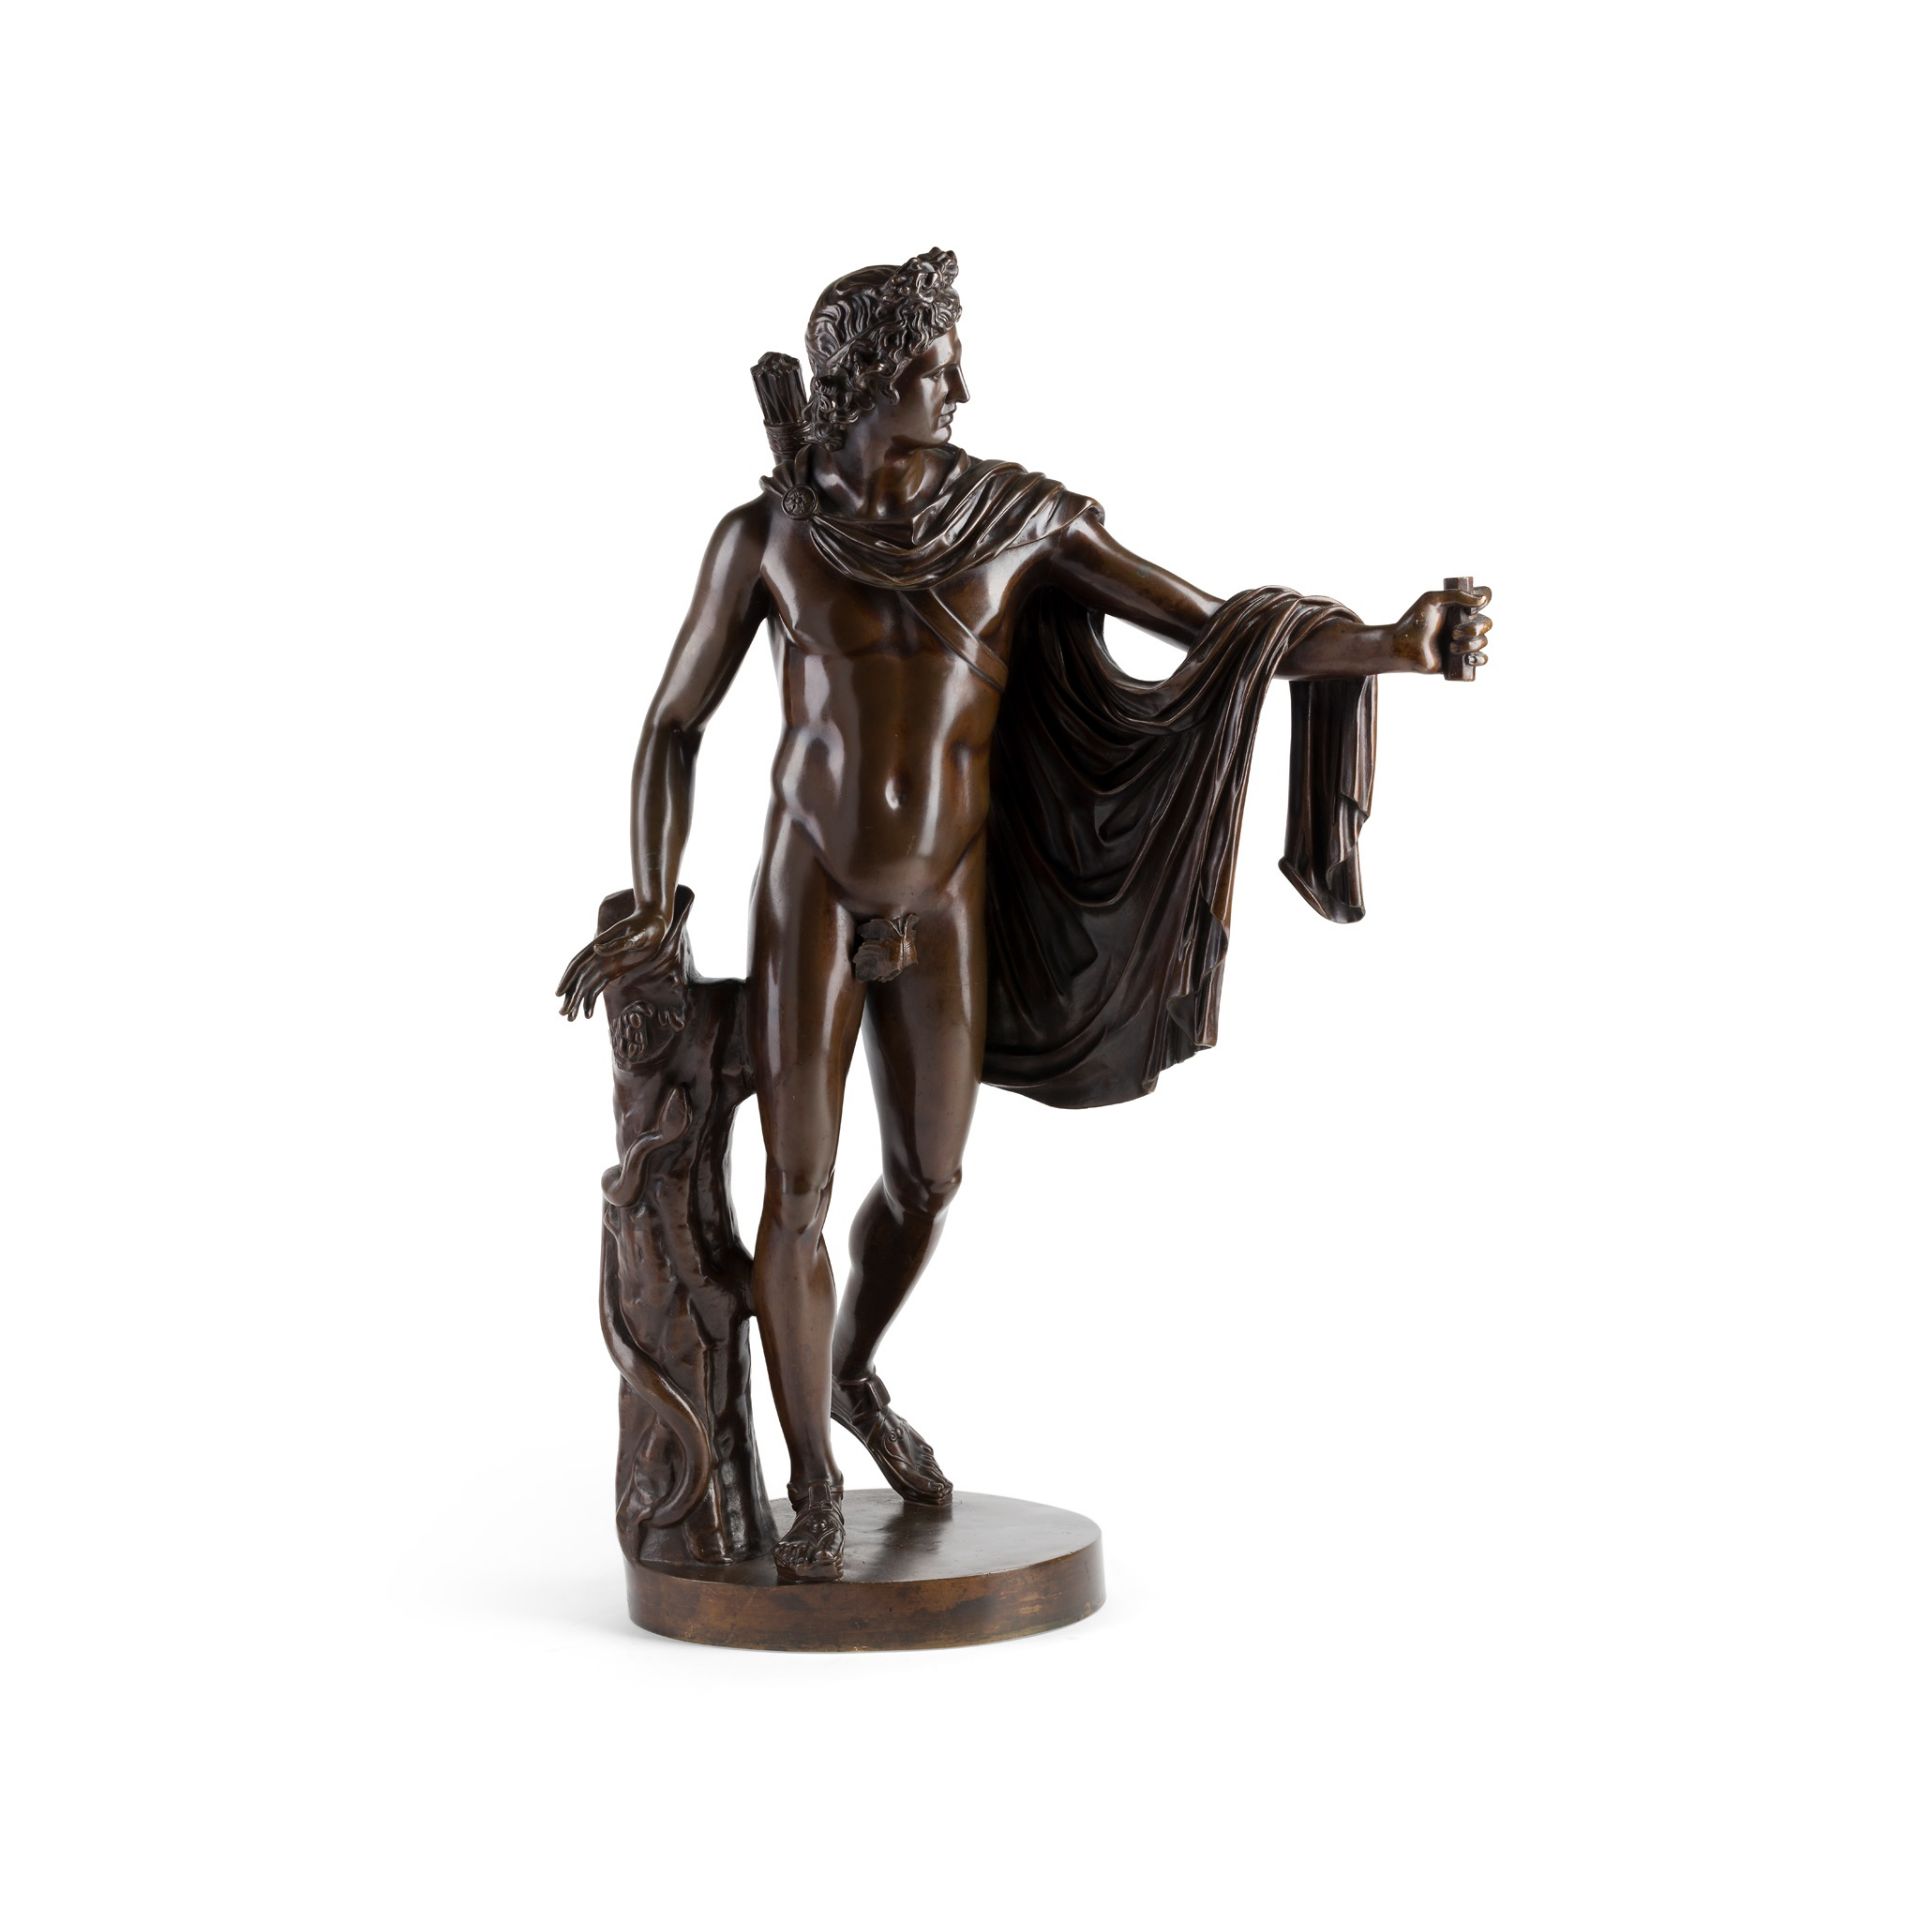 AFTER THE ANTIQUE, FRENCH BRONZE FIGURE OF APOLLO BELVEDERE 19TH CENTURY